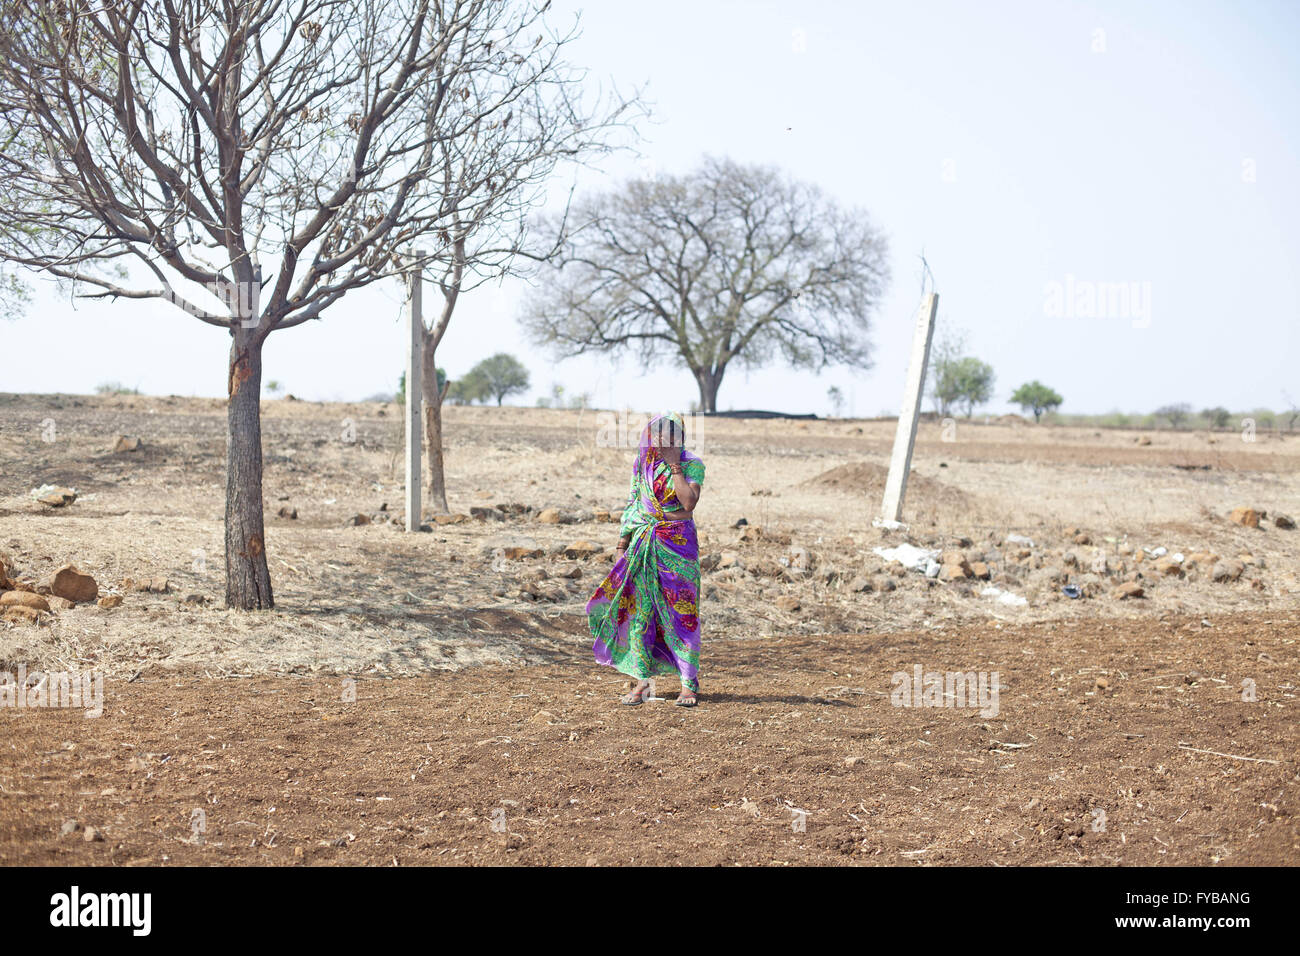 Latur, Maharashtra. 21st Apr, 2016. 21 April 2016 - Gategaon, Latur - INDIA.Kamalbai breaks down into tears as she stands under the dried Mango tree from which her husband & farmer Mahakant Mali, 55, hanged himself.Latur is part of the state's predominantly agricultural Marathwada region, where 273 farmers committed suicide between January and March this year.The area is among the worst affected by the drought and some families in Latur have left for cities such as the state capital Mumbai, nearly 500 kilometres away. In Latur town, there are huge queues at water storage tanks that ar Stock Photo